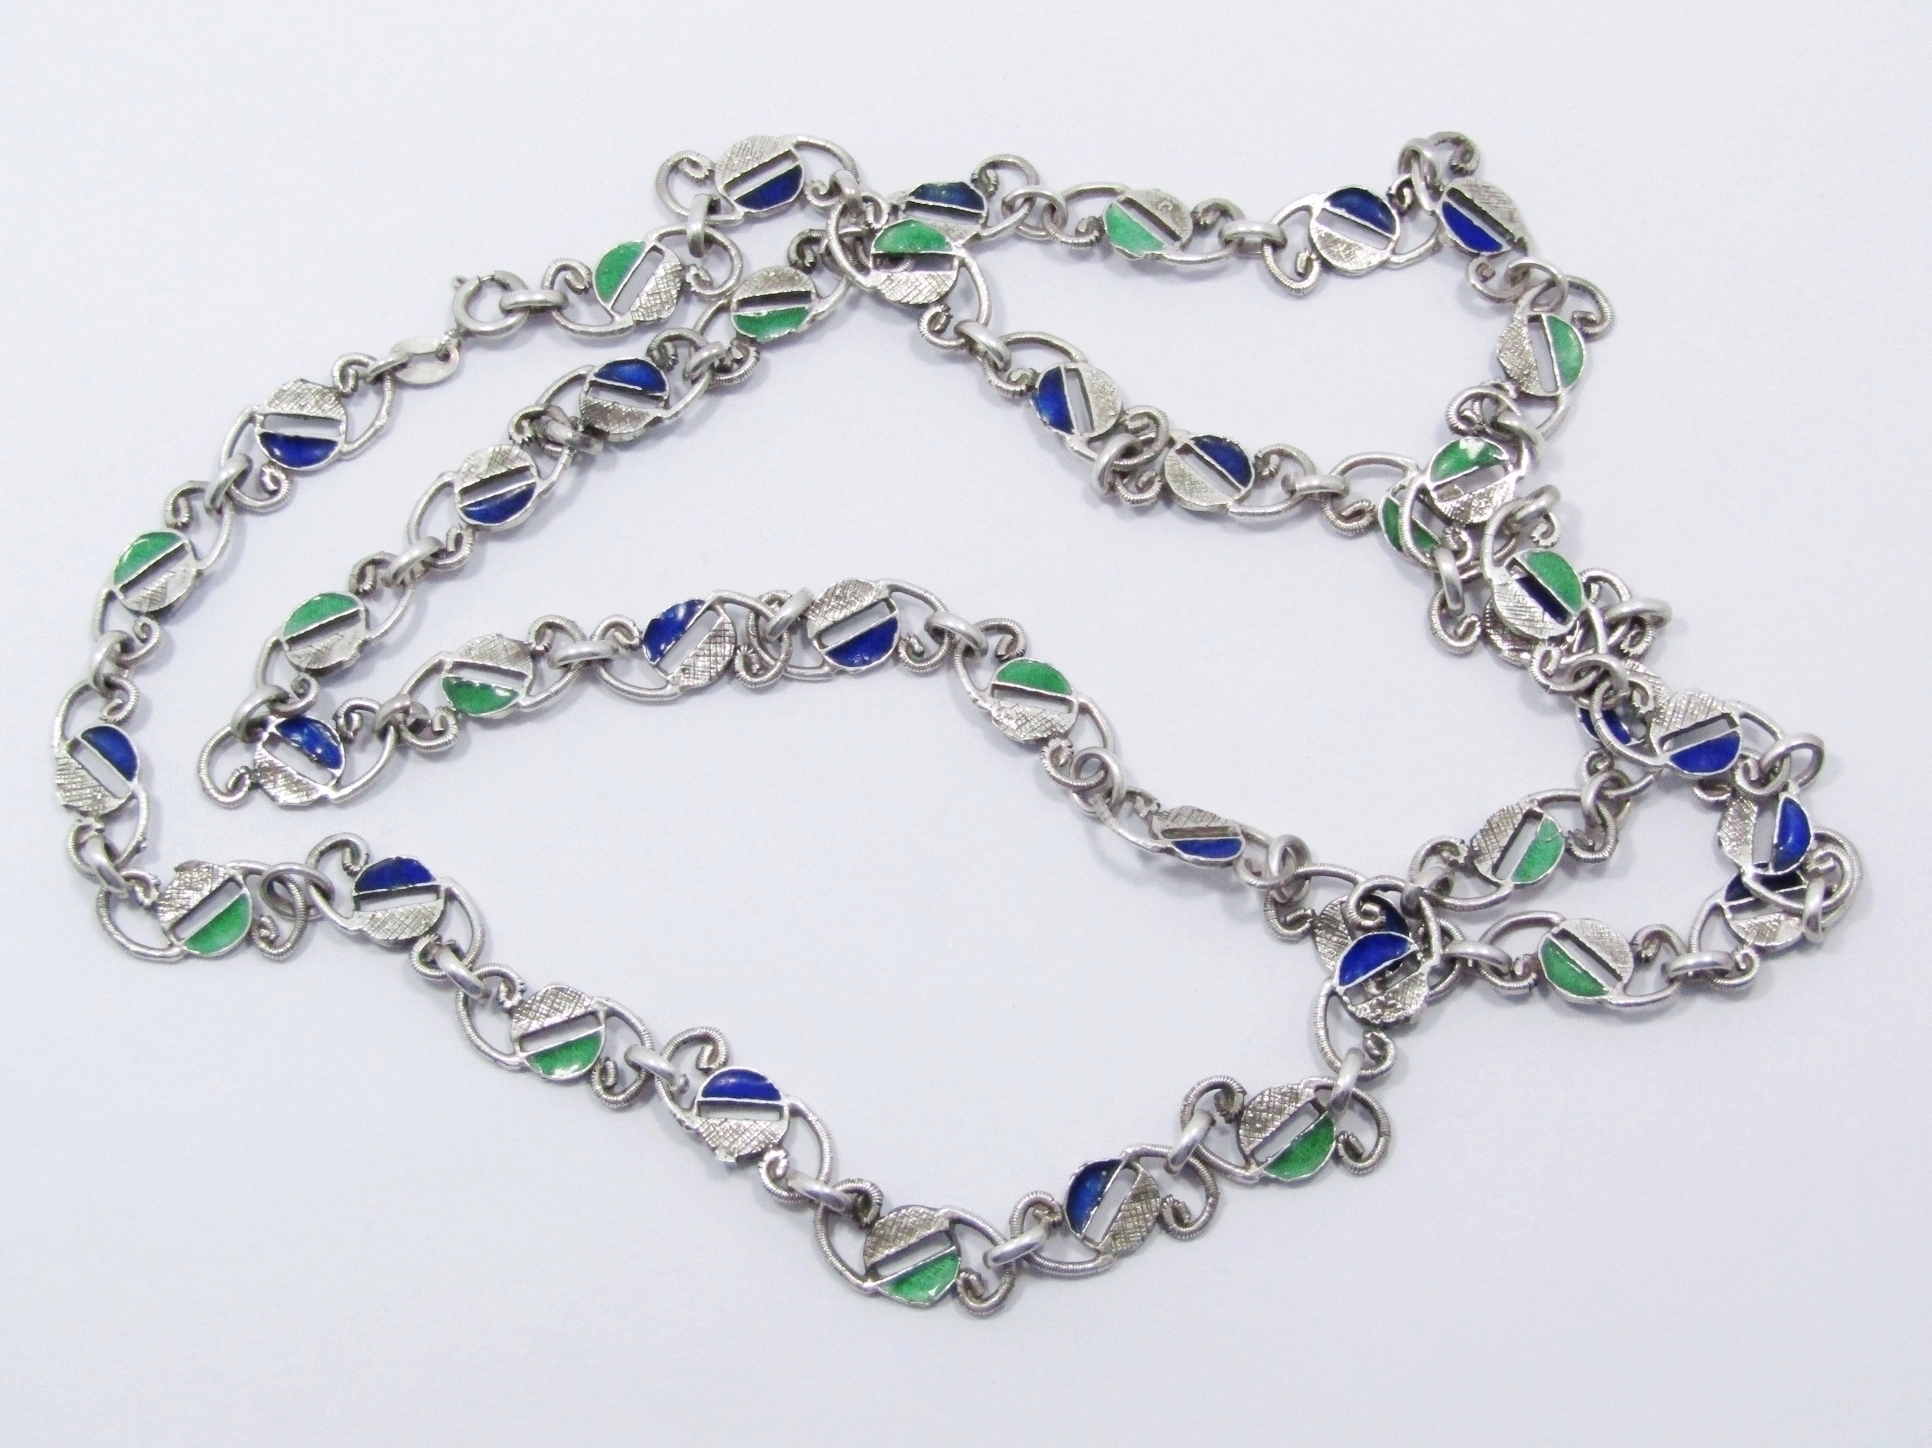 A Stunning Long Fancy Link Necklace With a Enamel Inlay in Silver.